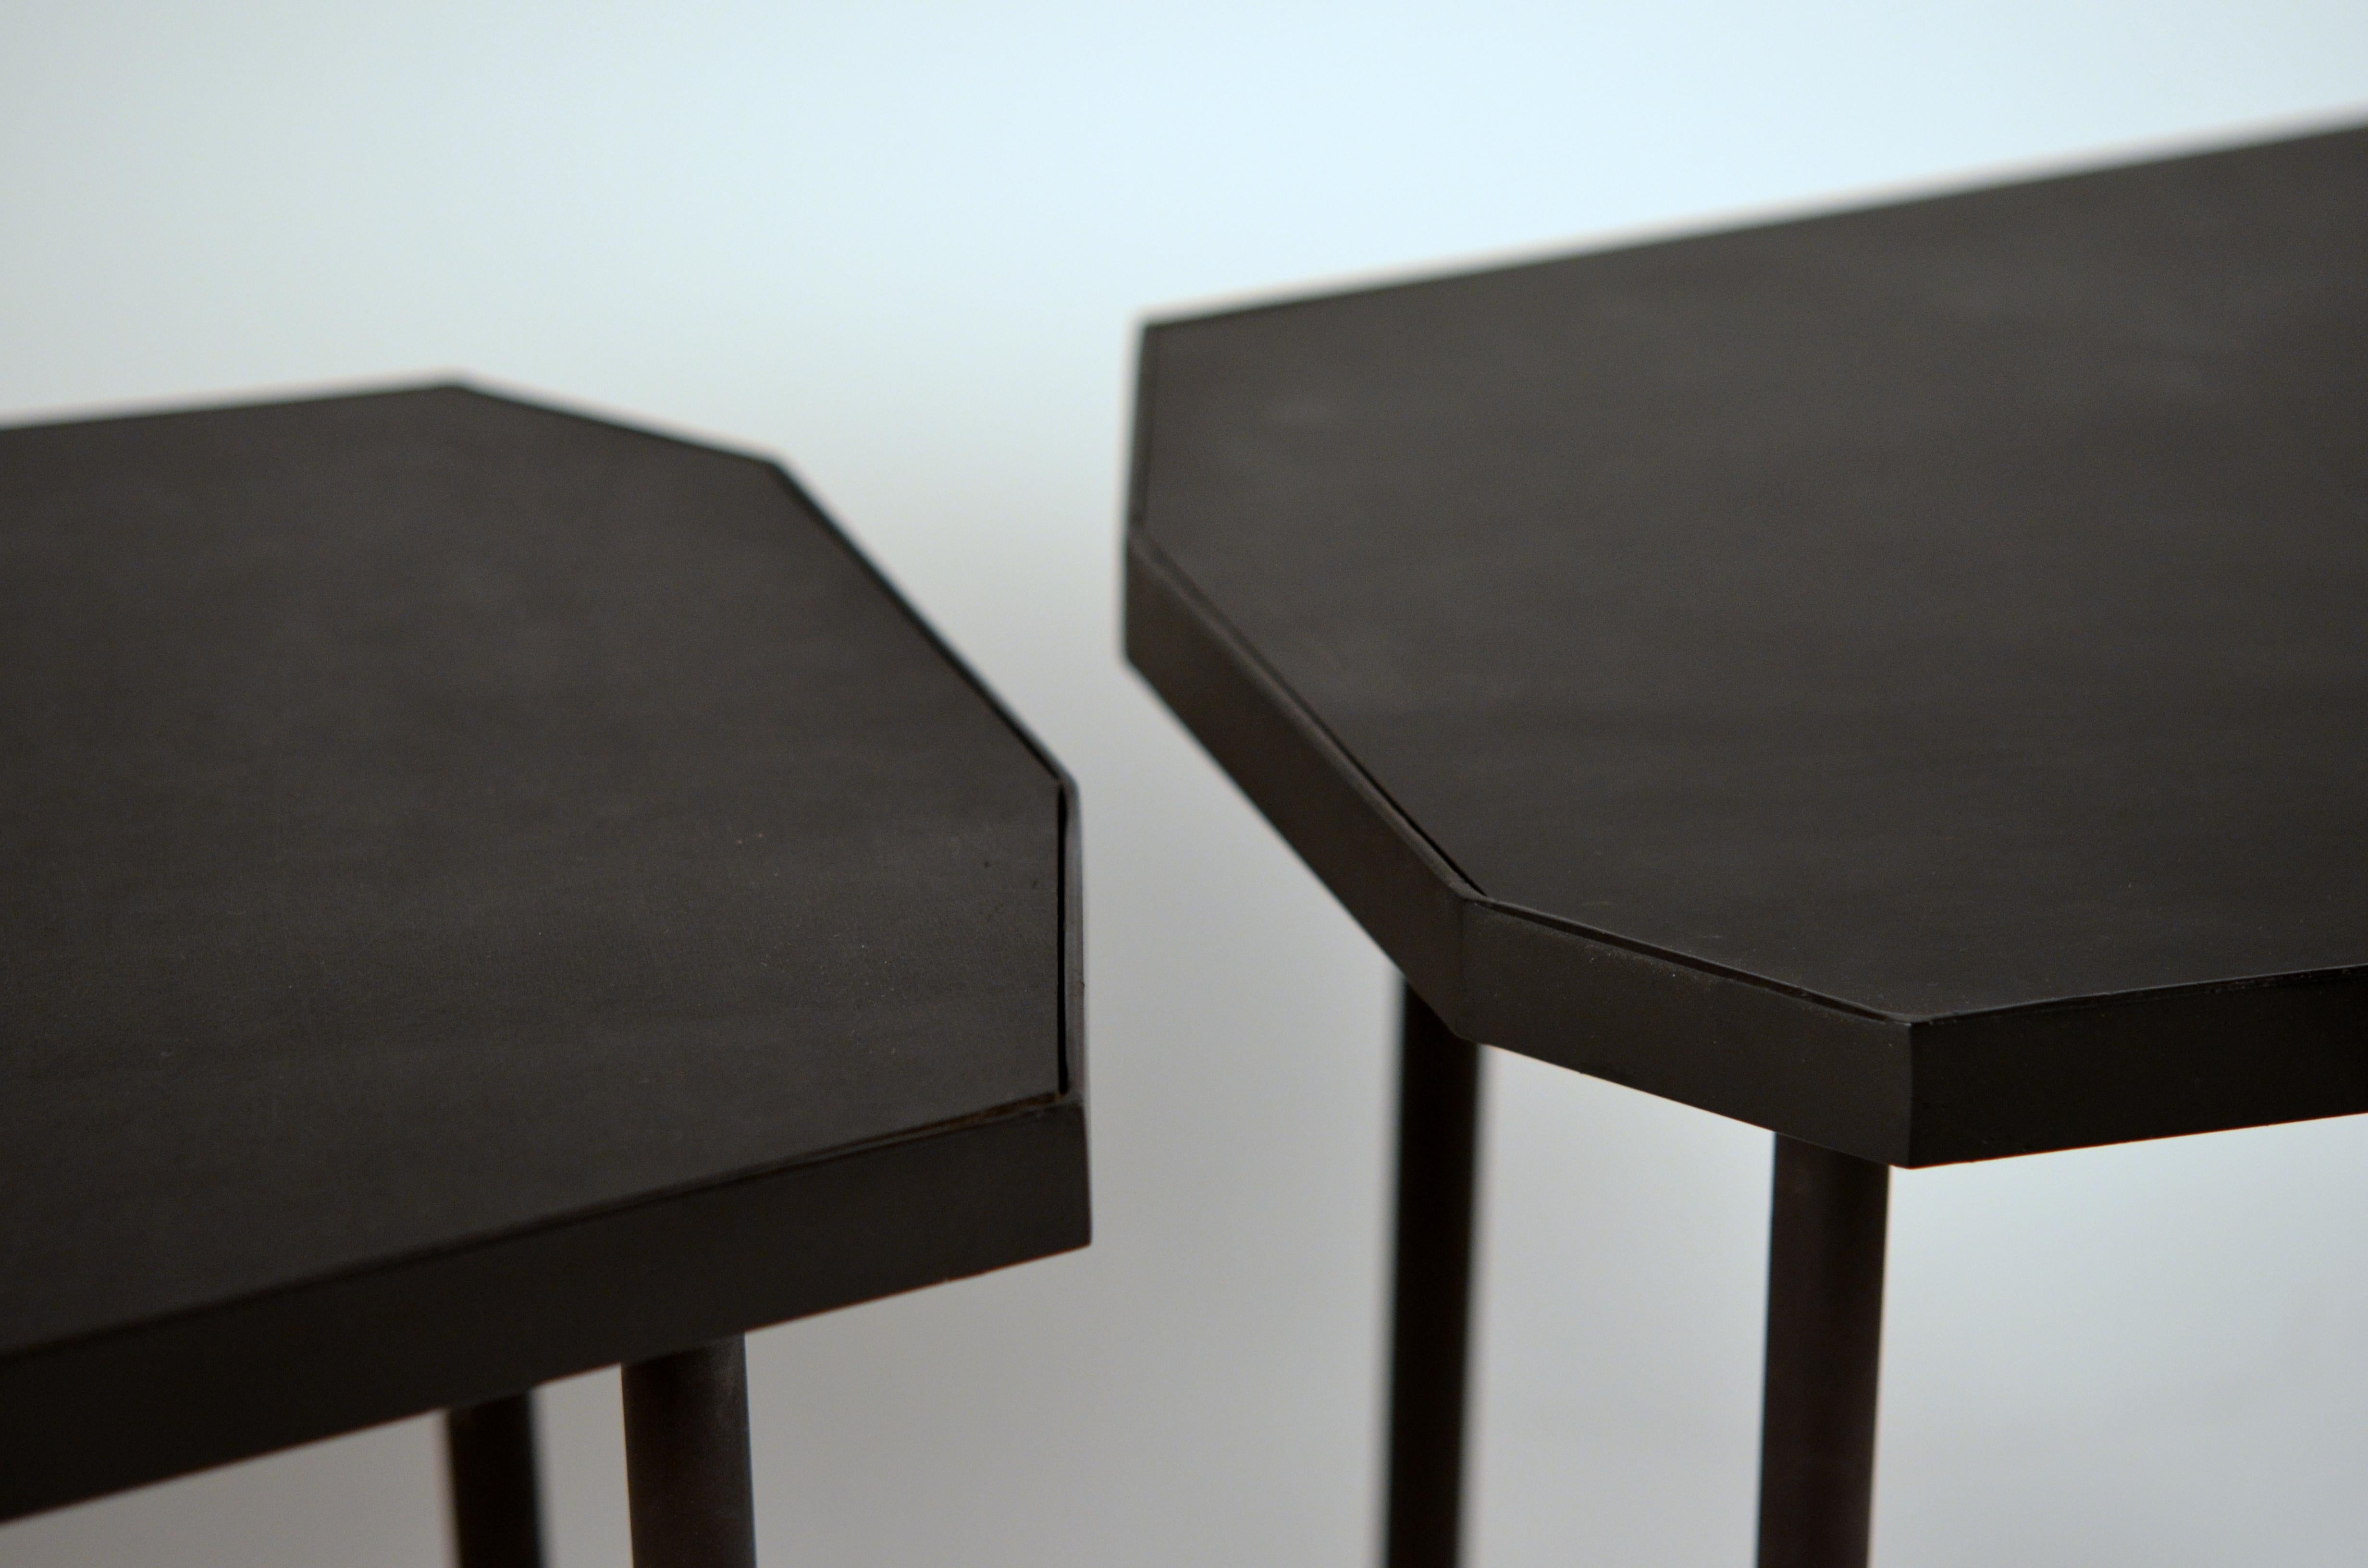 Dyed Pair of Asymmetrical 'Décagone' Black Leather Side Tables by Design Frères For Sale